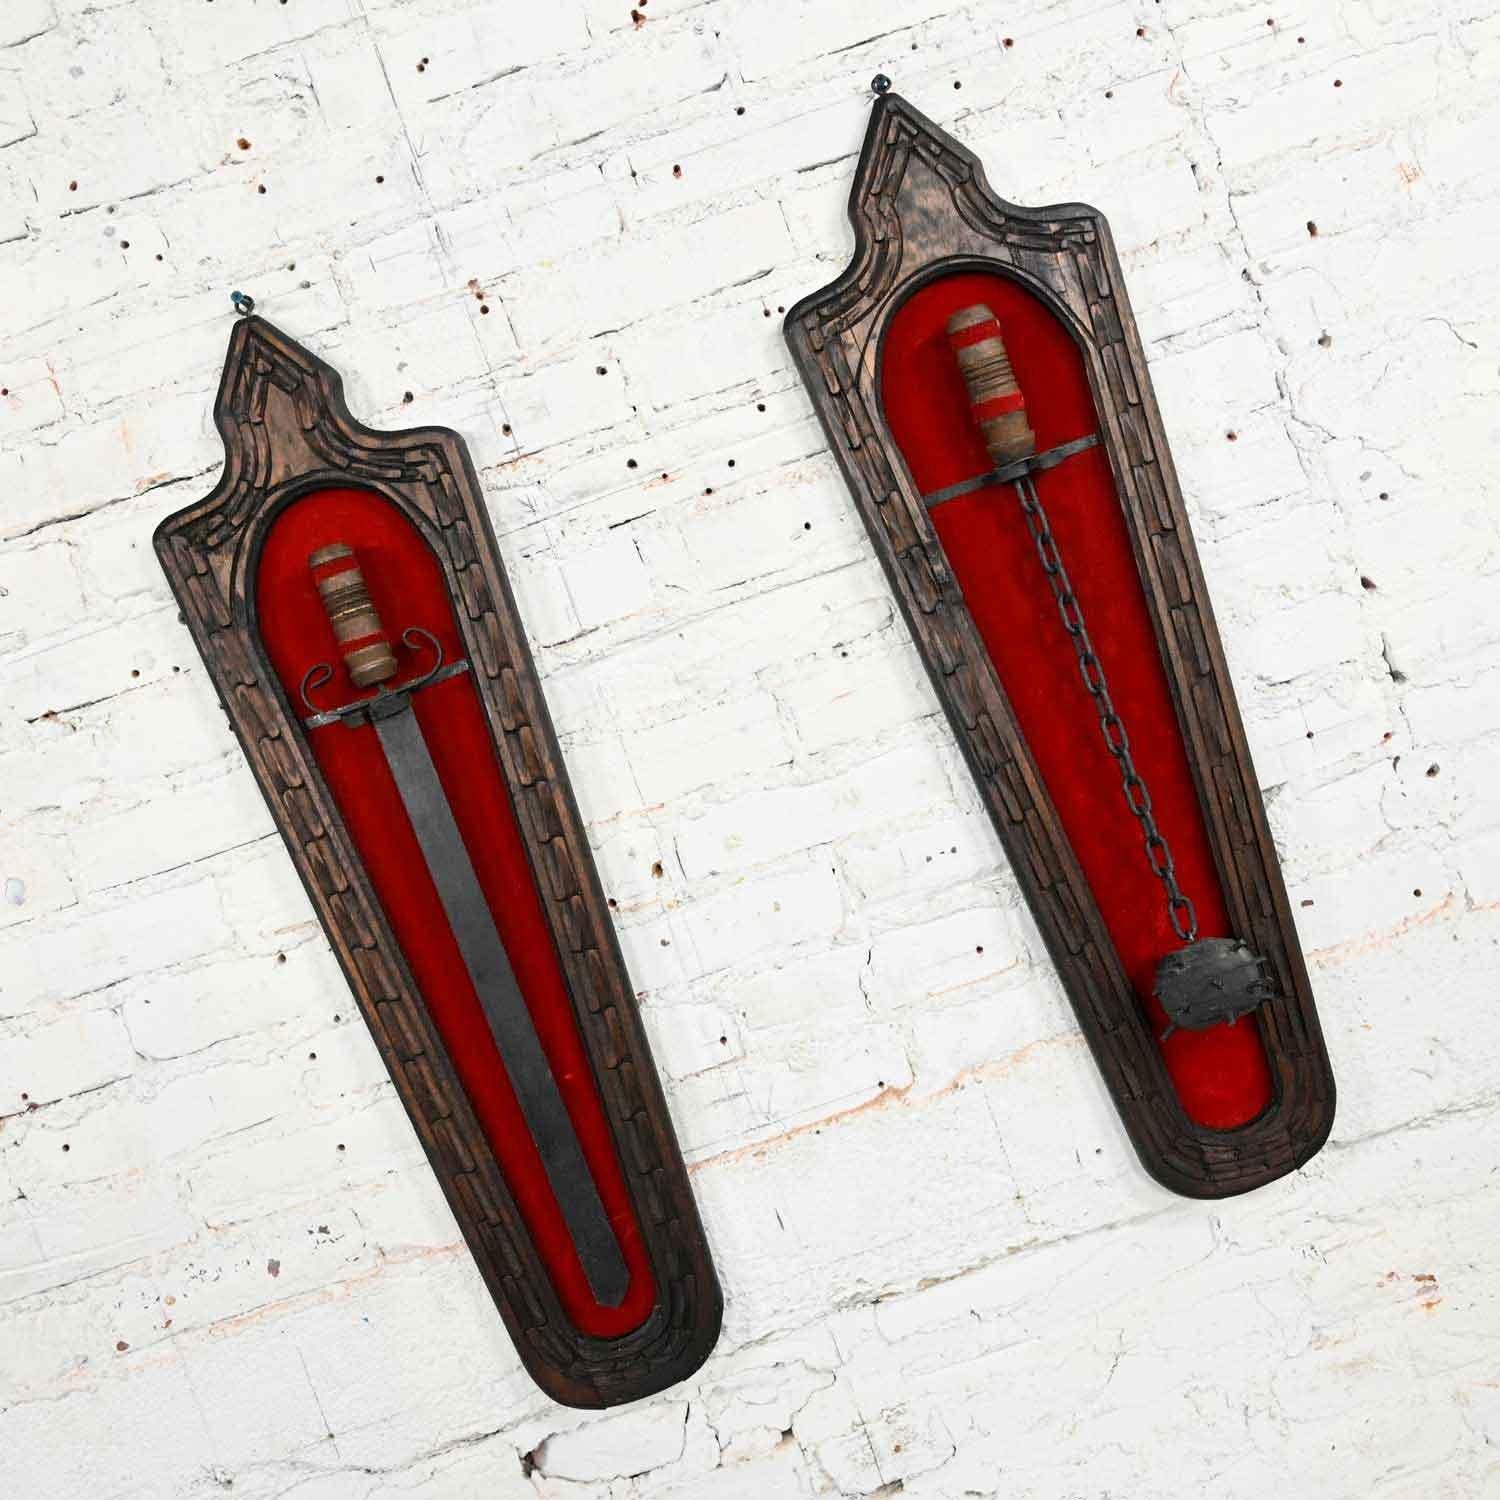 Awesome vintage Spanish Revival tavern sword and medieval ball flail wall décor comprised of carved wood frames with red felt backing, wood handles, black painted metal & wood sword & flail in the style of Witco. Beautiful condition, keeping in mind